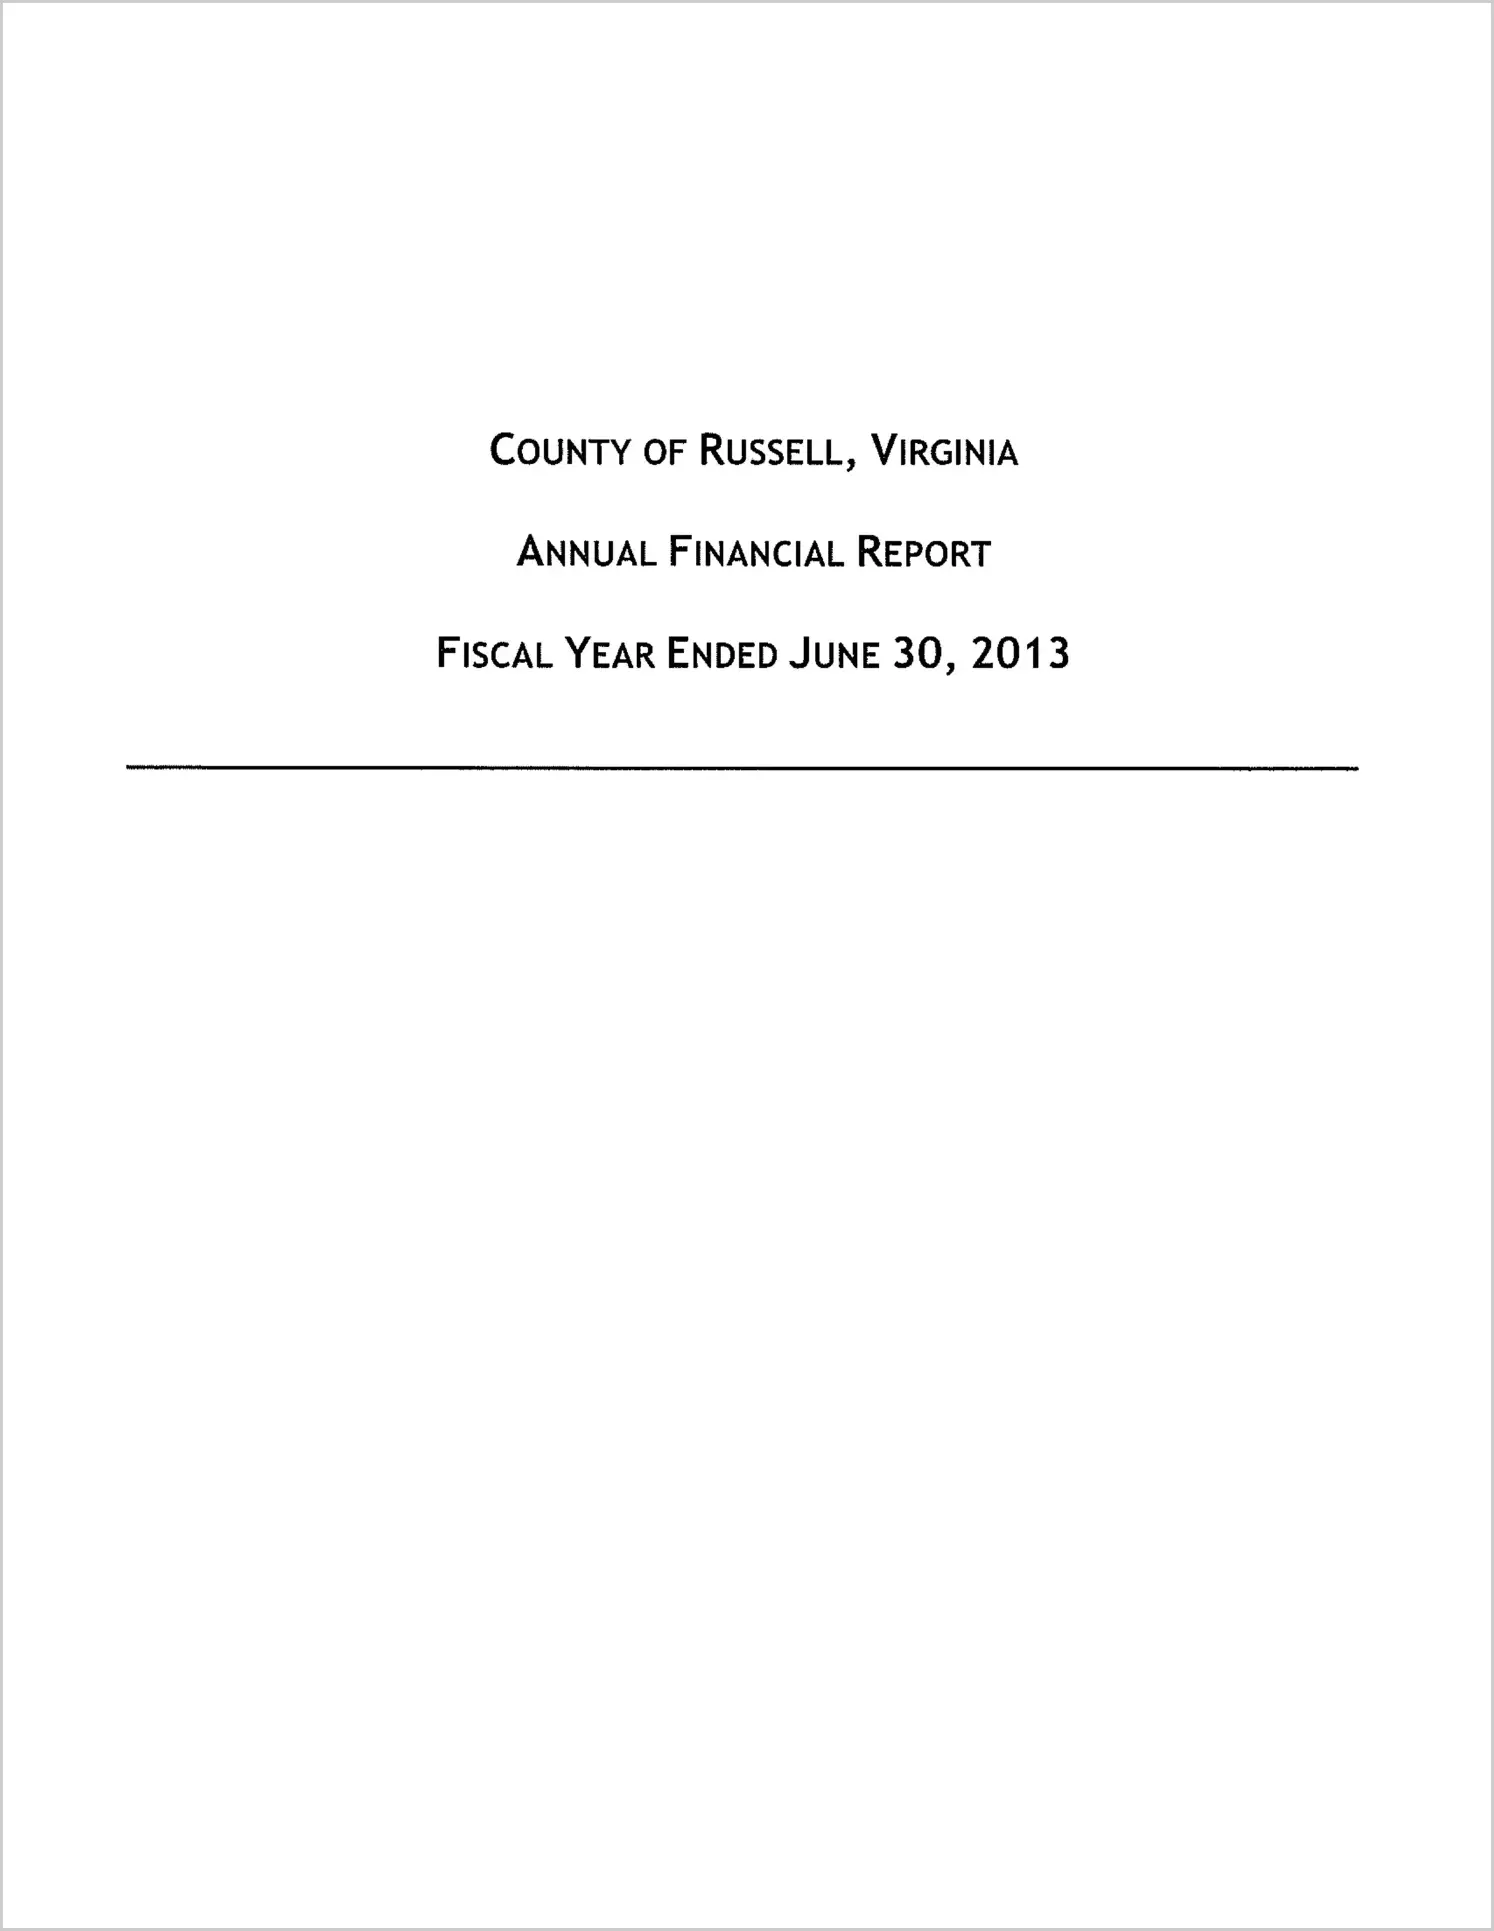 2013 Annual Financial Report for County of Russell